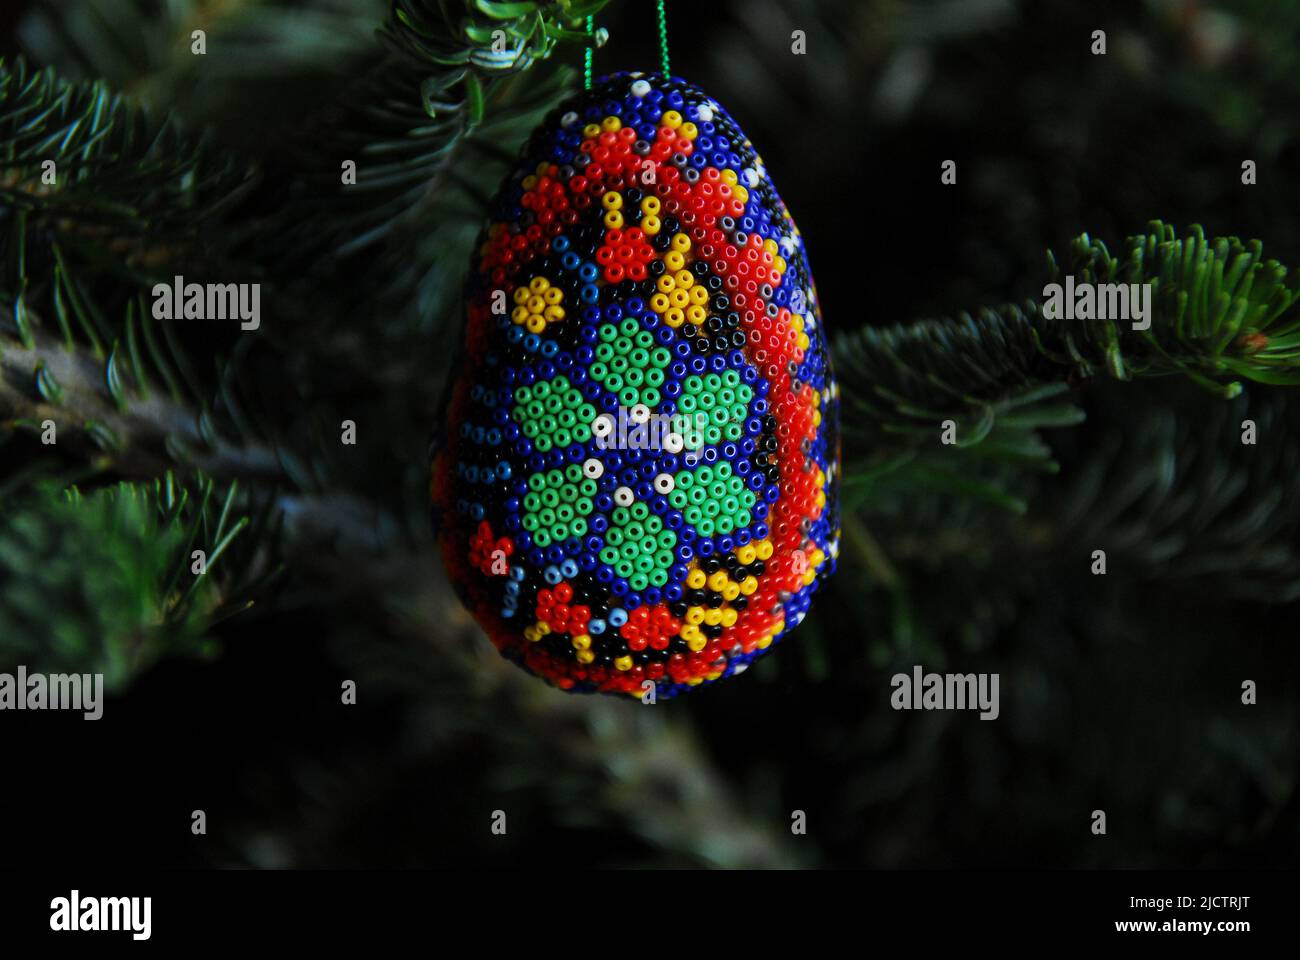 Christmas- Close up of a colorful homemade tree ornament made of egg shaped wax with a pattern of tiny multi colored beads pressed in. Stock Photo